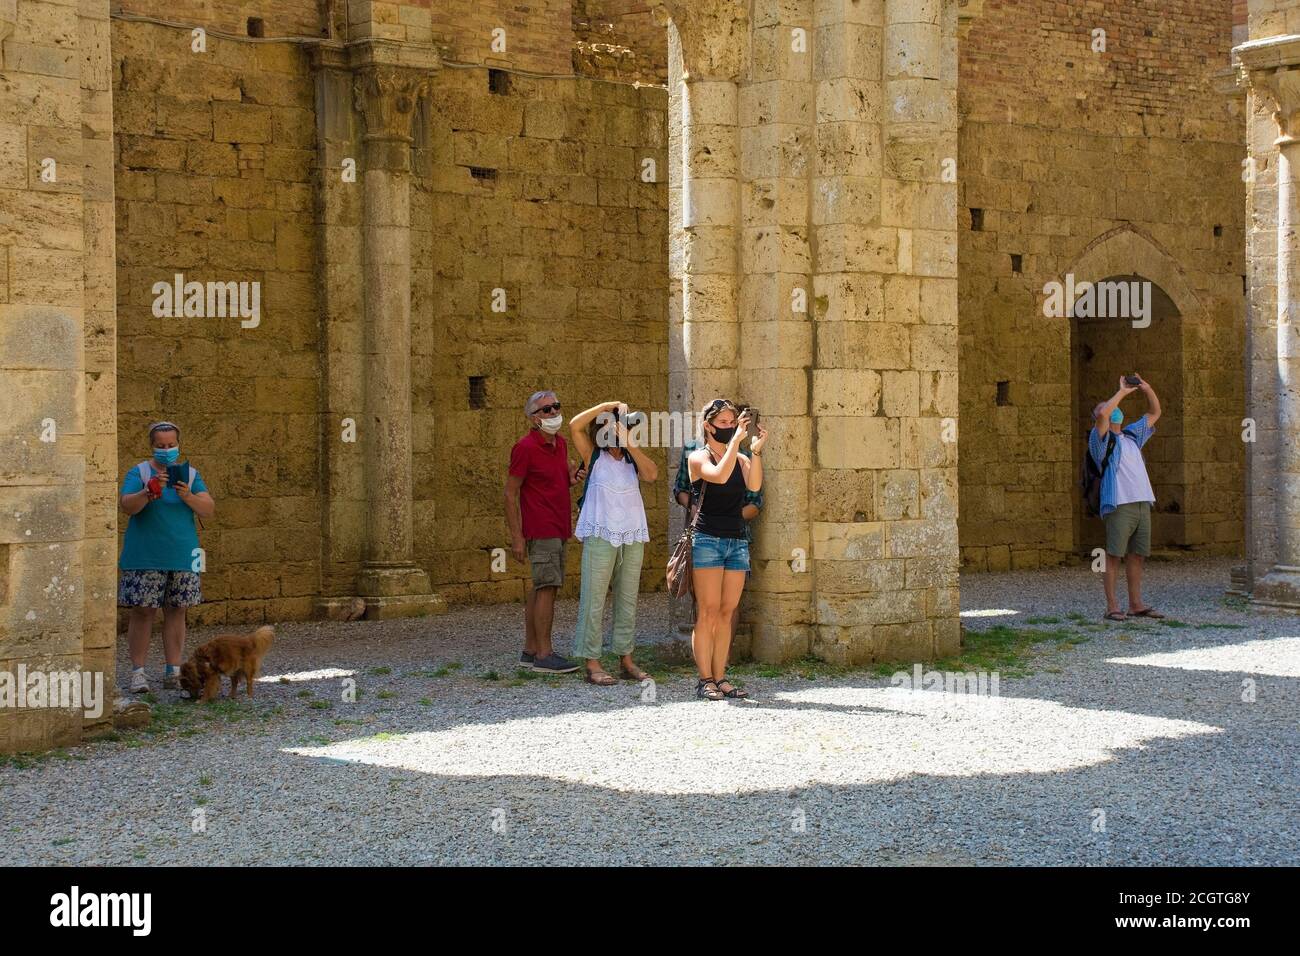 Monticiano,Italy - September 7th 2020. Tourists wearing masks take photos in the historic roofless 13th century gothic cistercian abbey of San Galgano Stock Photo